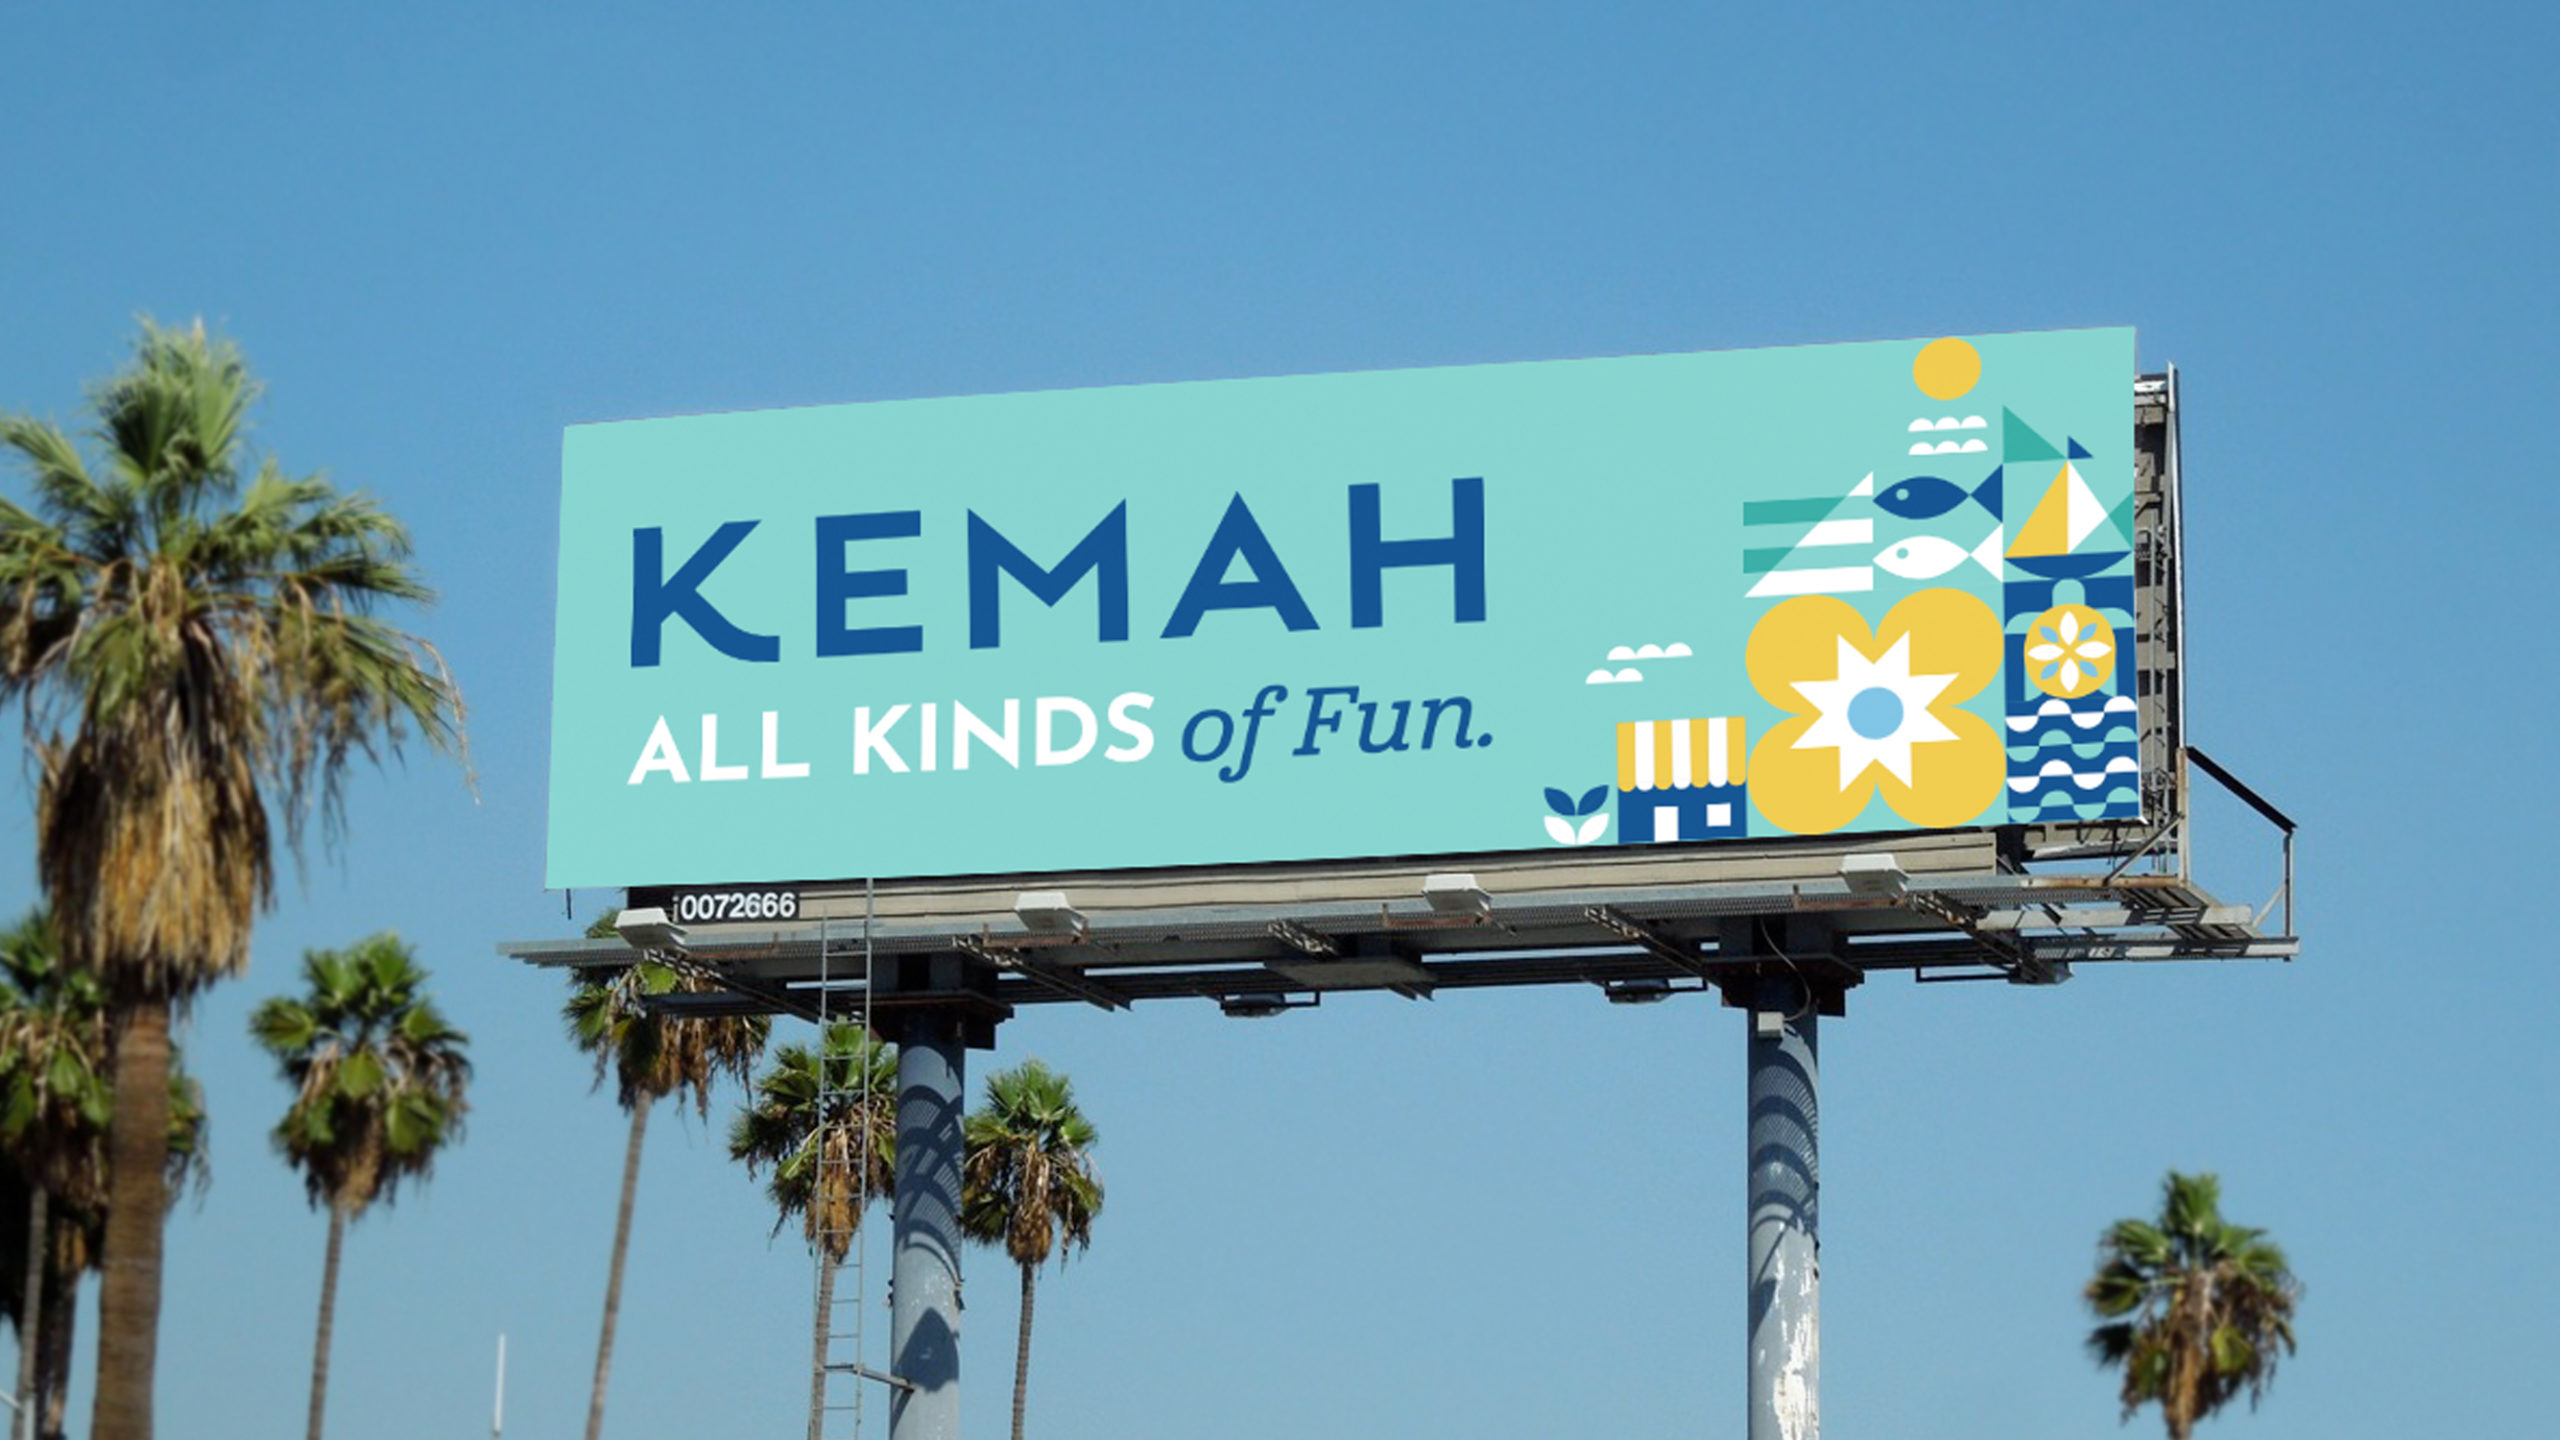 Showing the Kemah TX logo and slogan on a billboard. Branding and logo designed by MDR. Kemah is a small coastal town just outside of Houston.